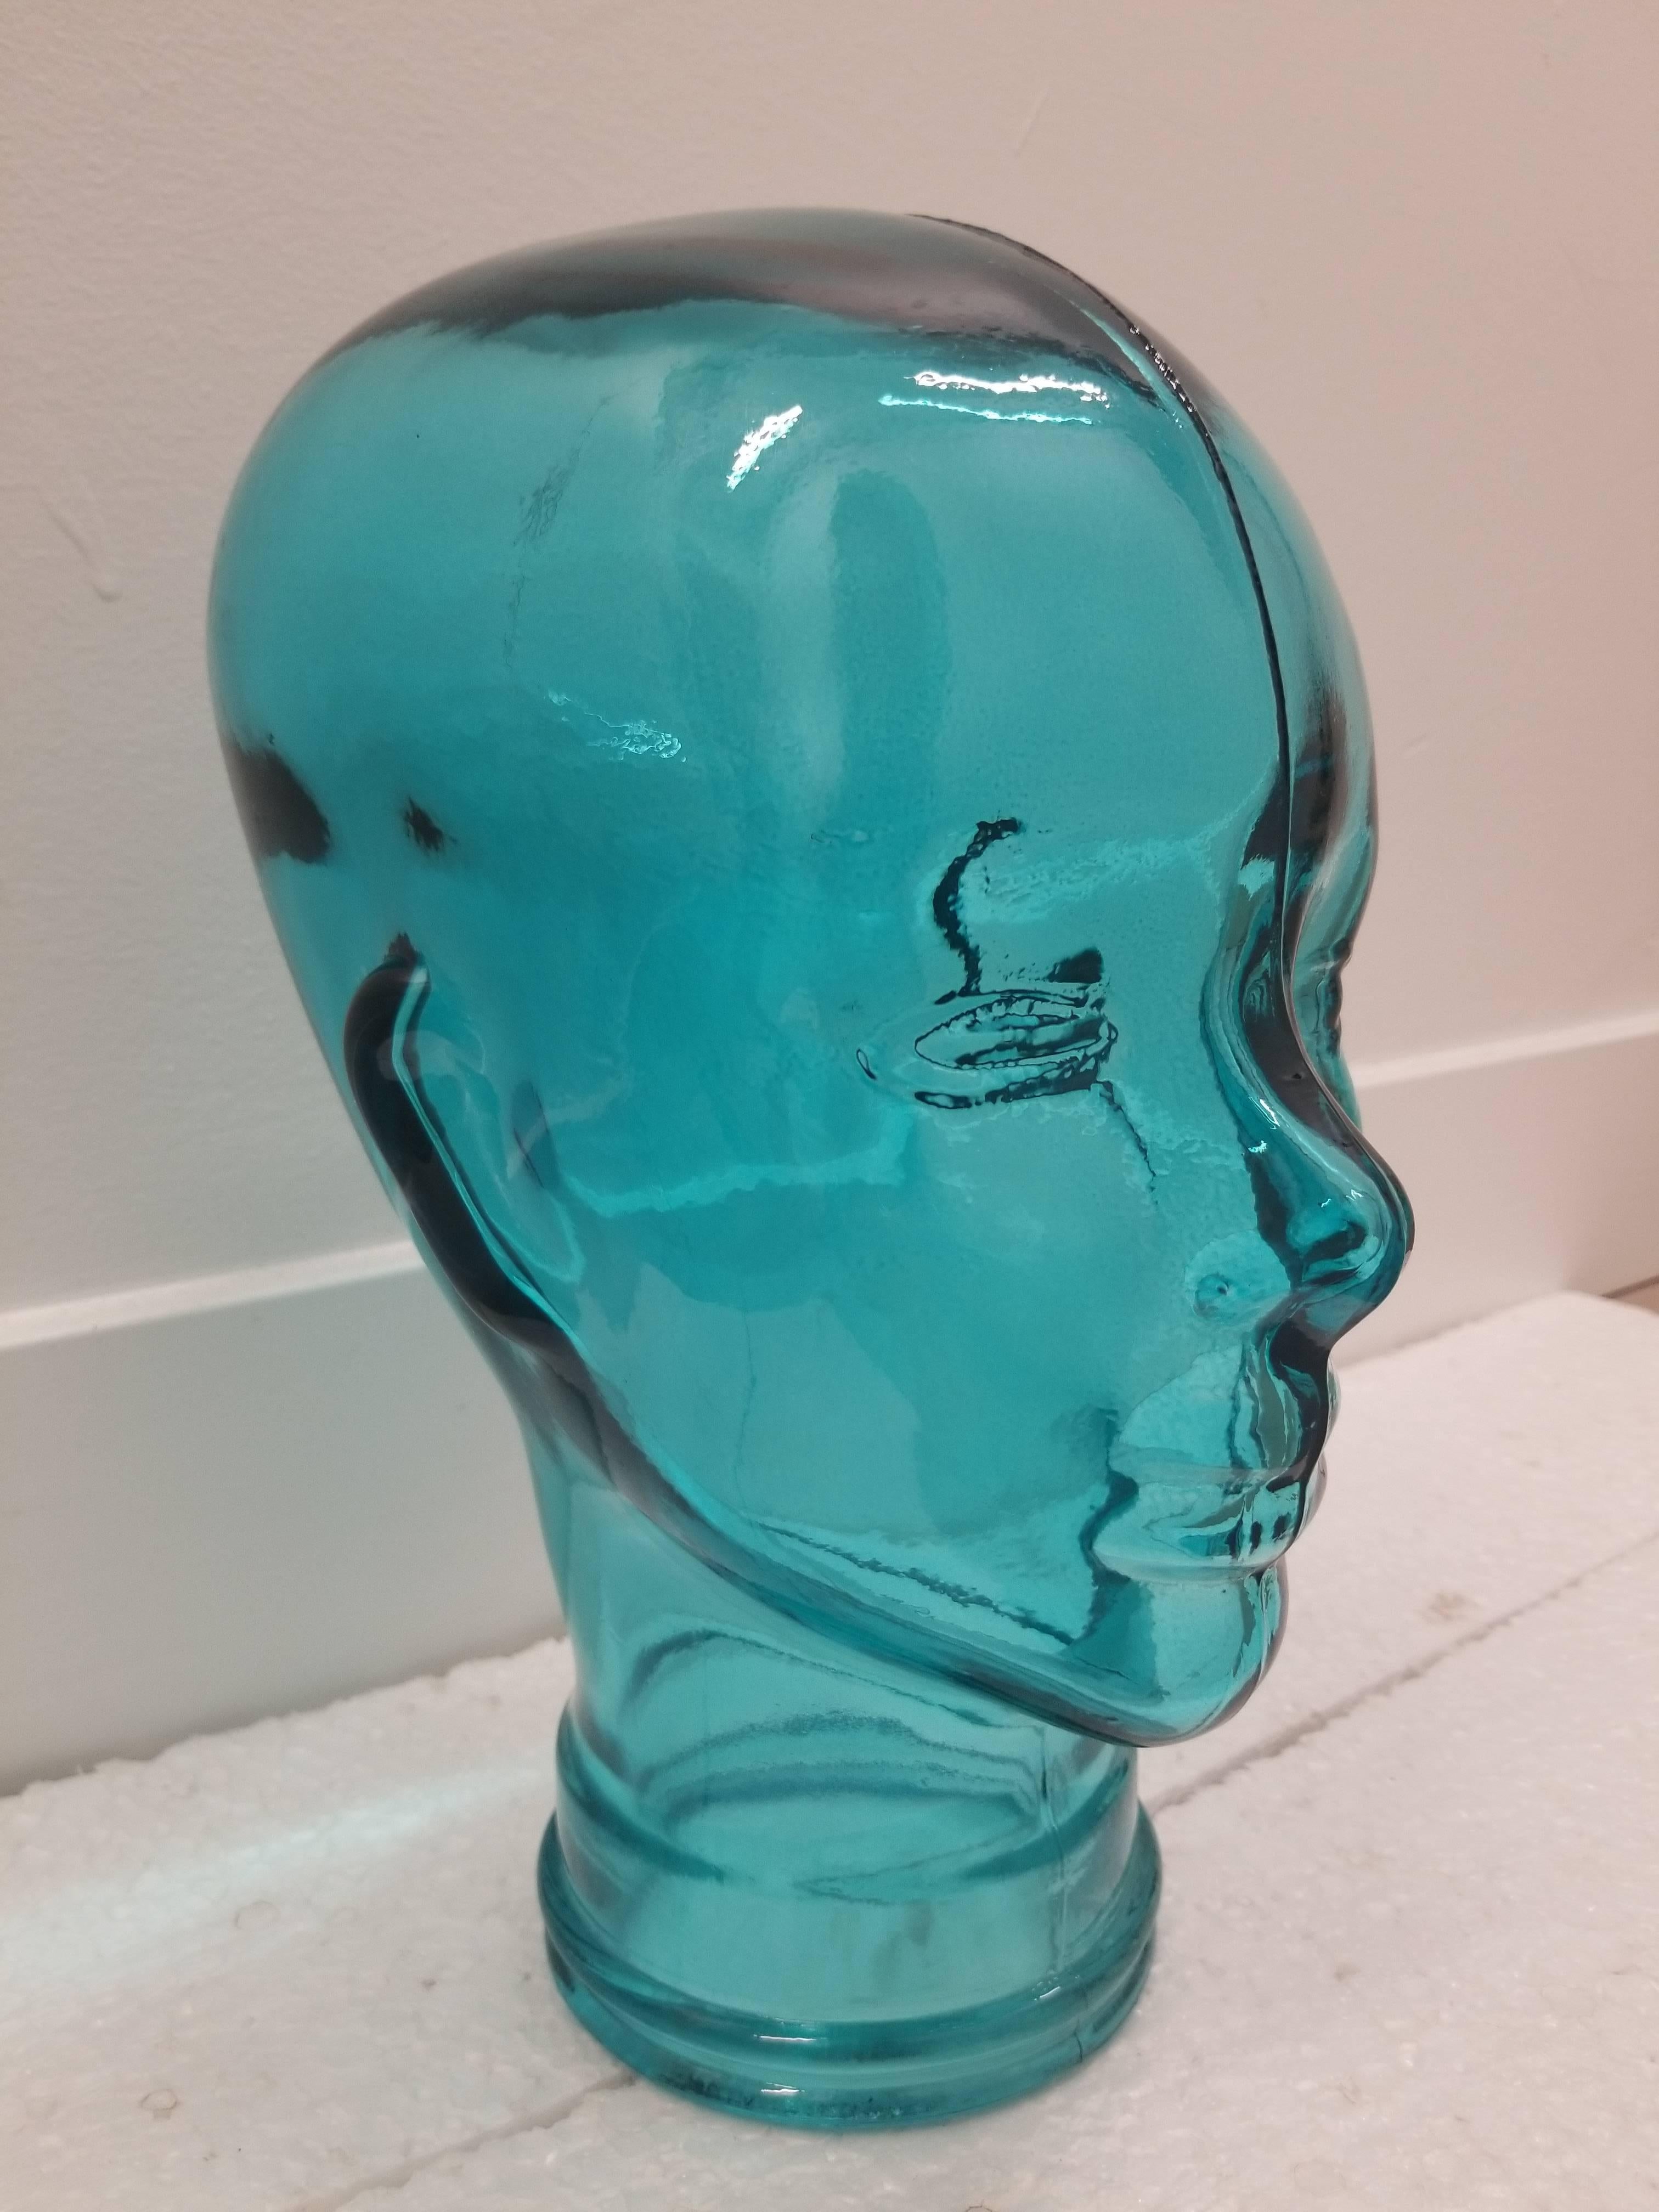 This turquoise colored glass sculptural head is a colorful and playful addition to any designed bookcase or coffee table. The light plays beautifully upon it!